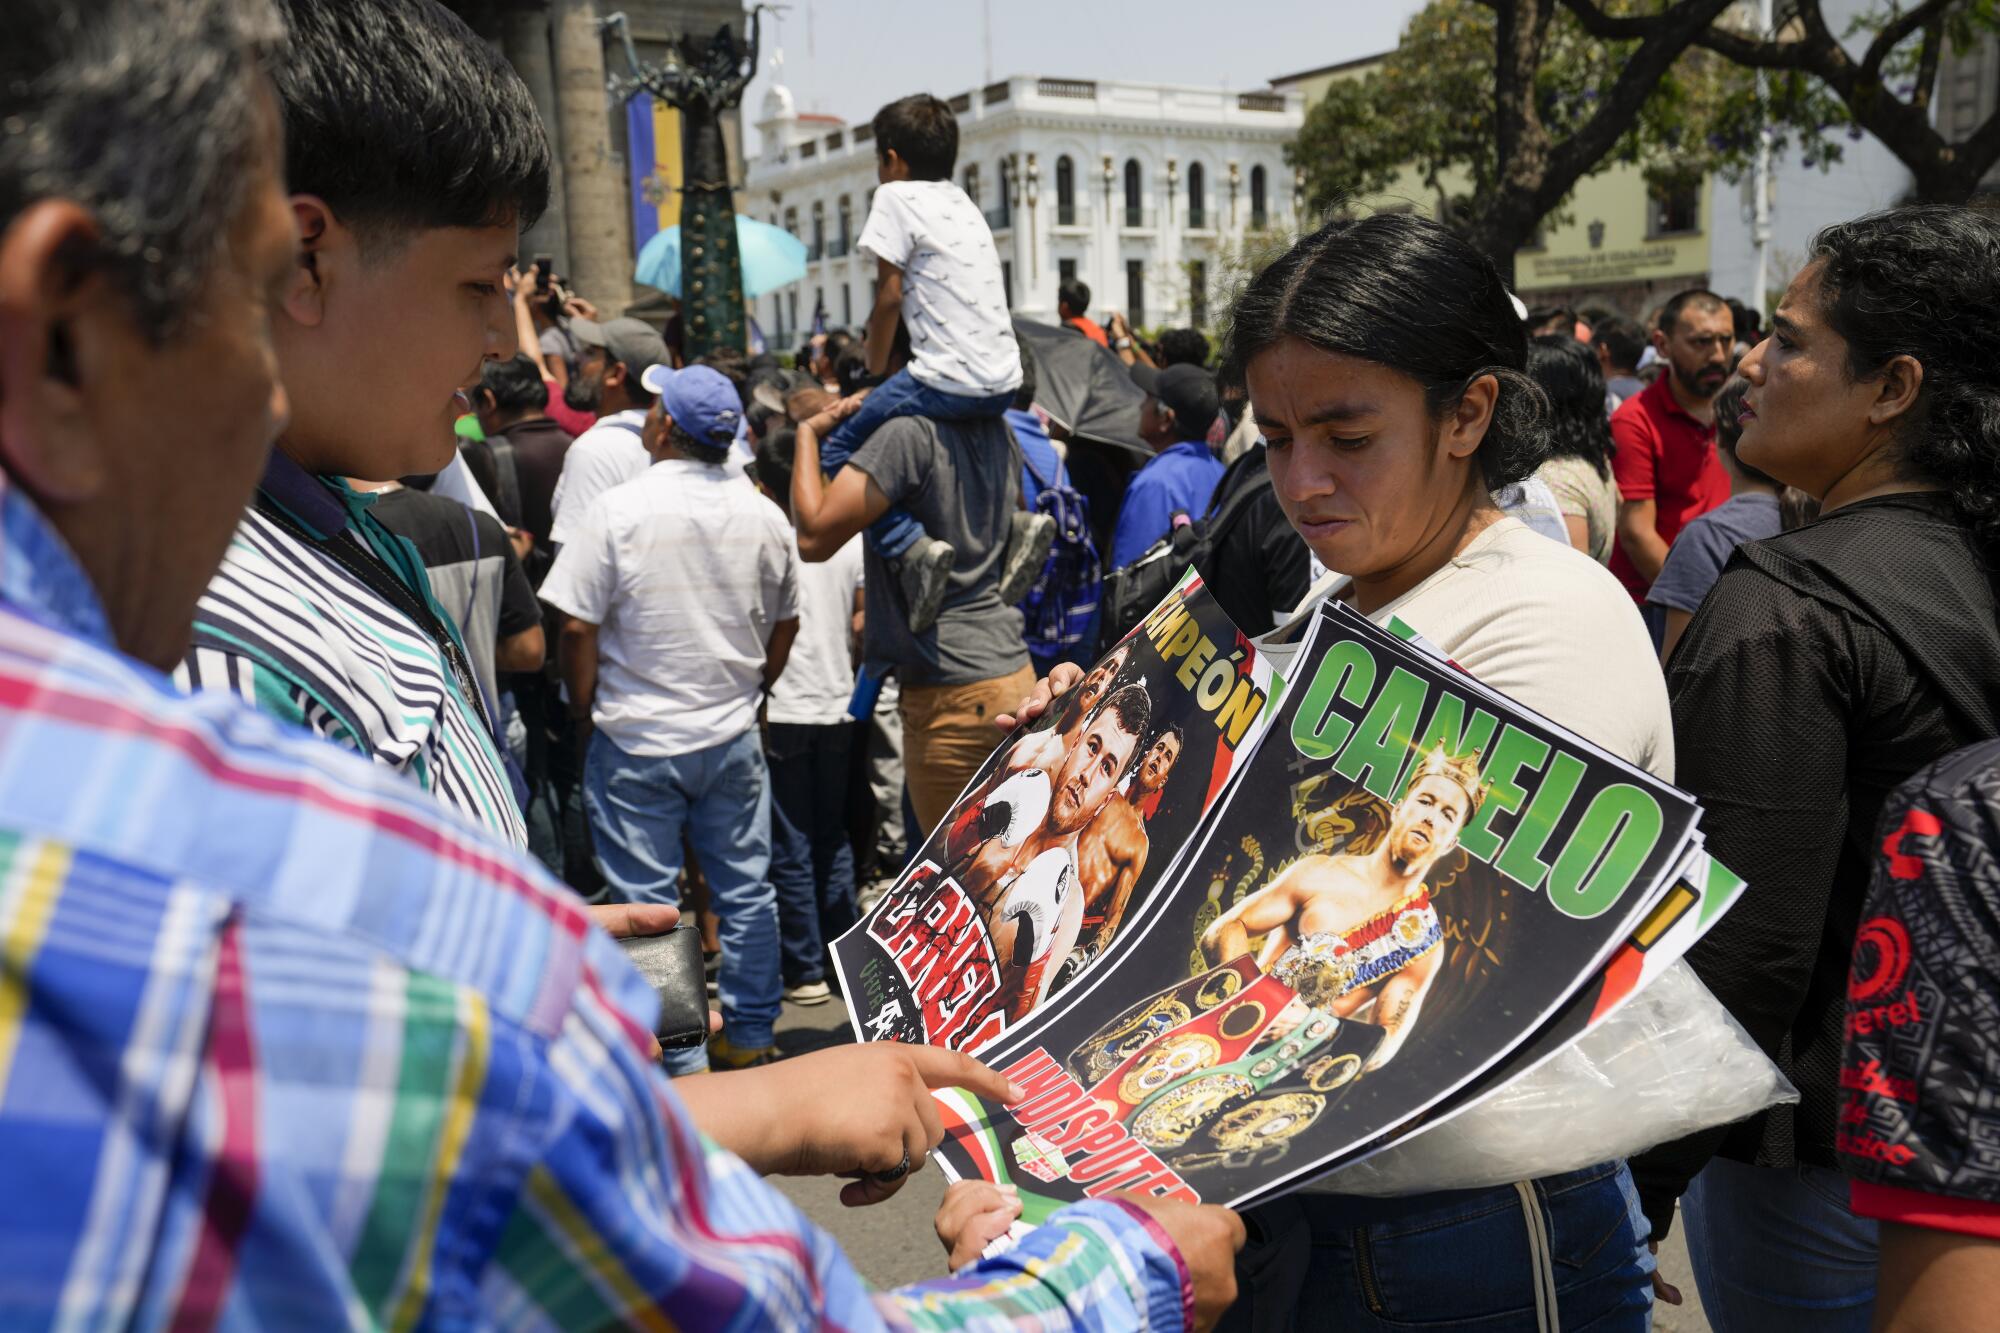 Fans buy posters of Mexican boxer Saul "Can 